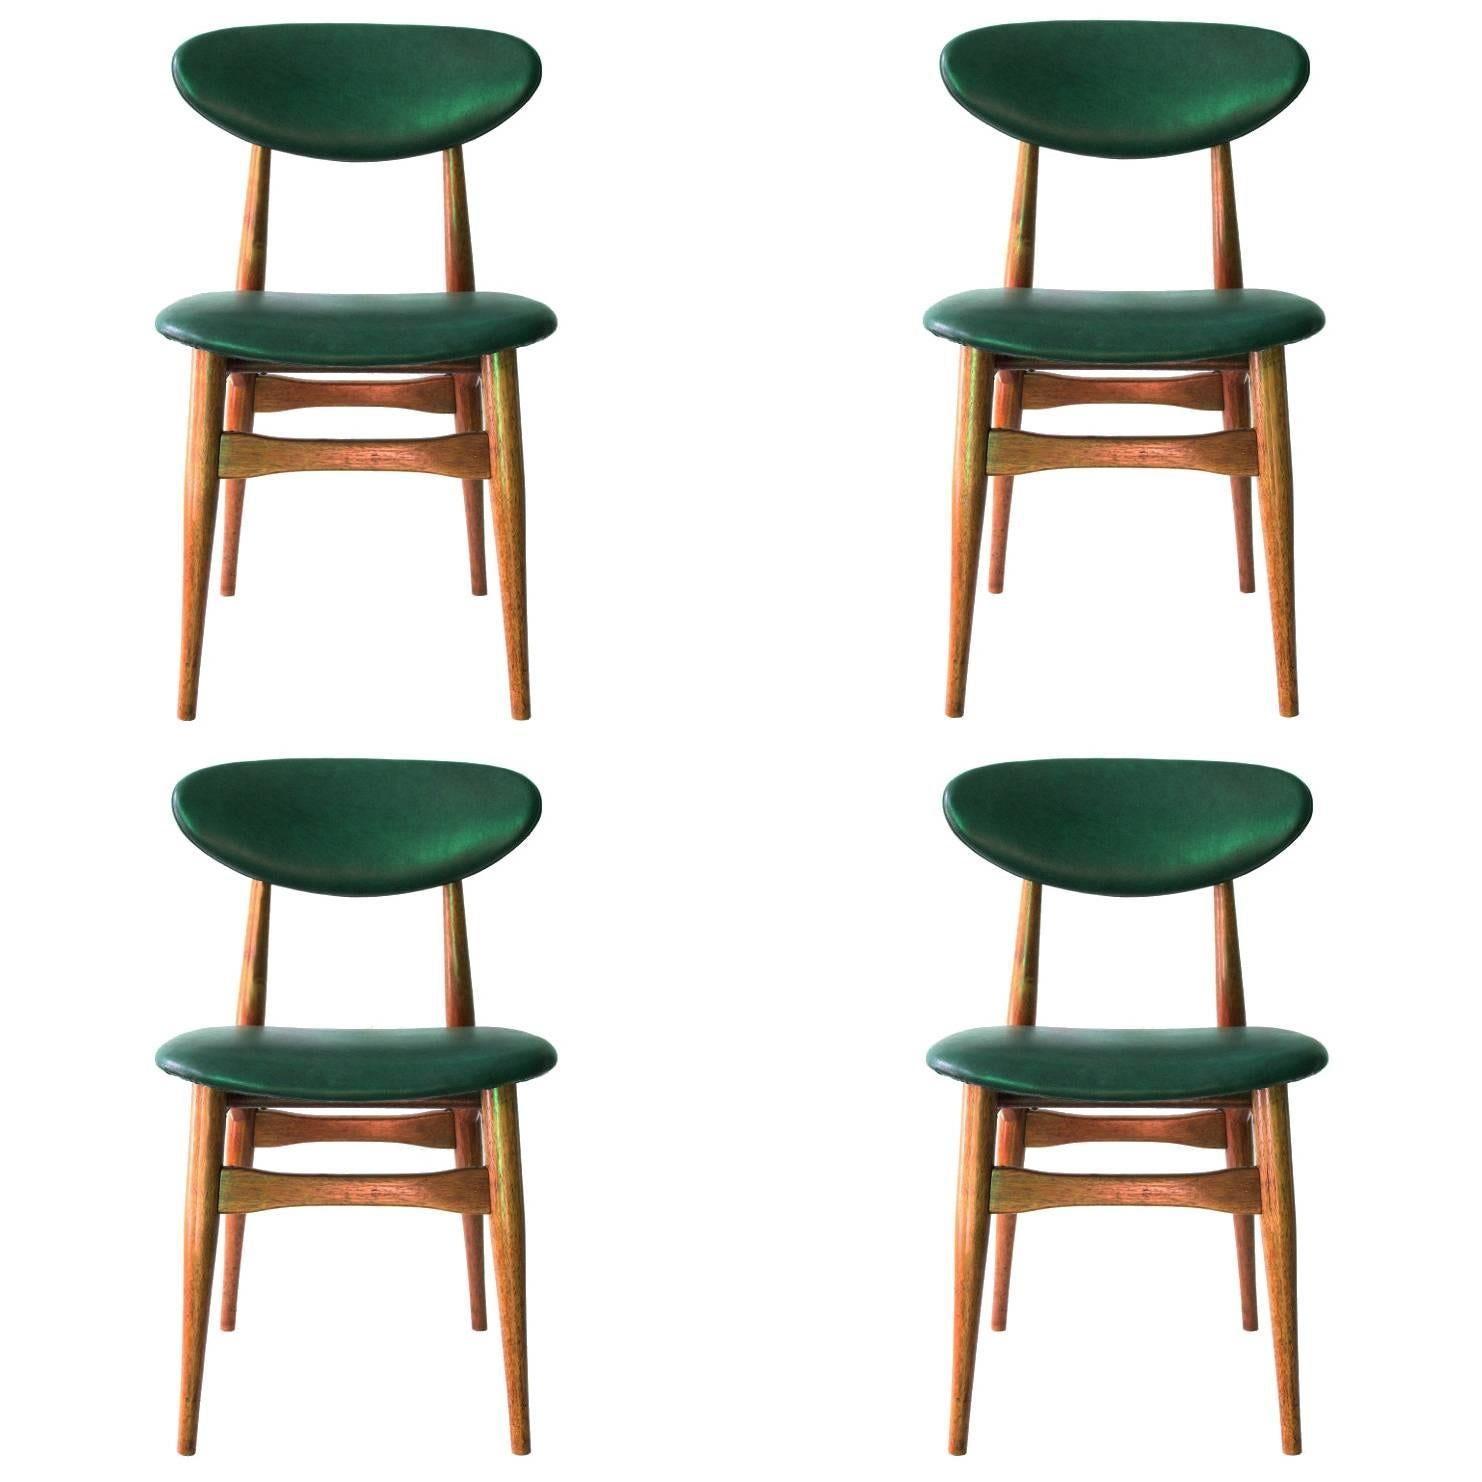 Set of Four Danish Teak Dining Chairs with Green Vinyl Backs and Seats